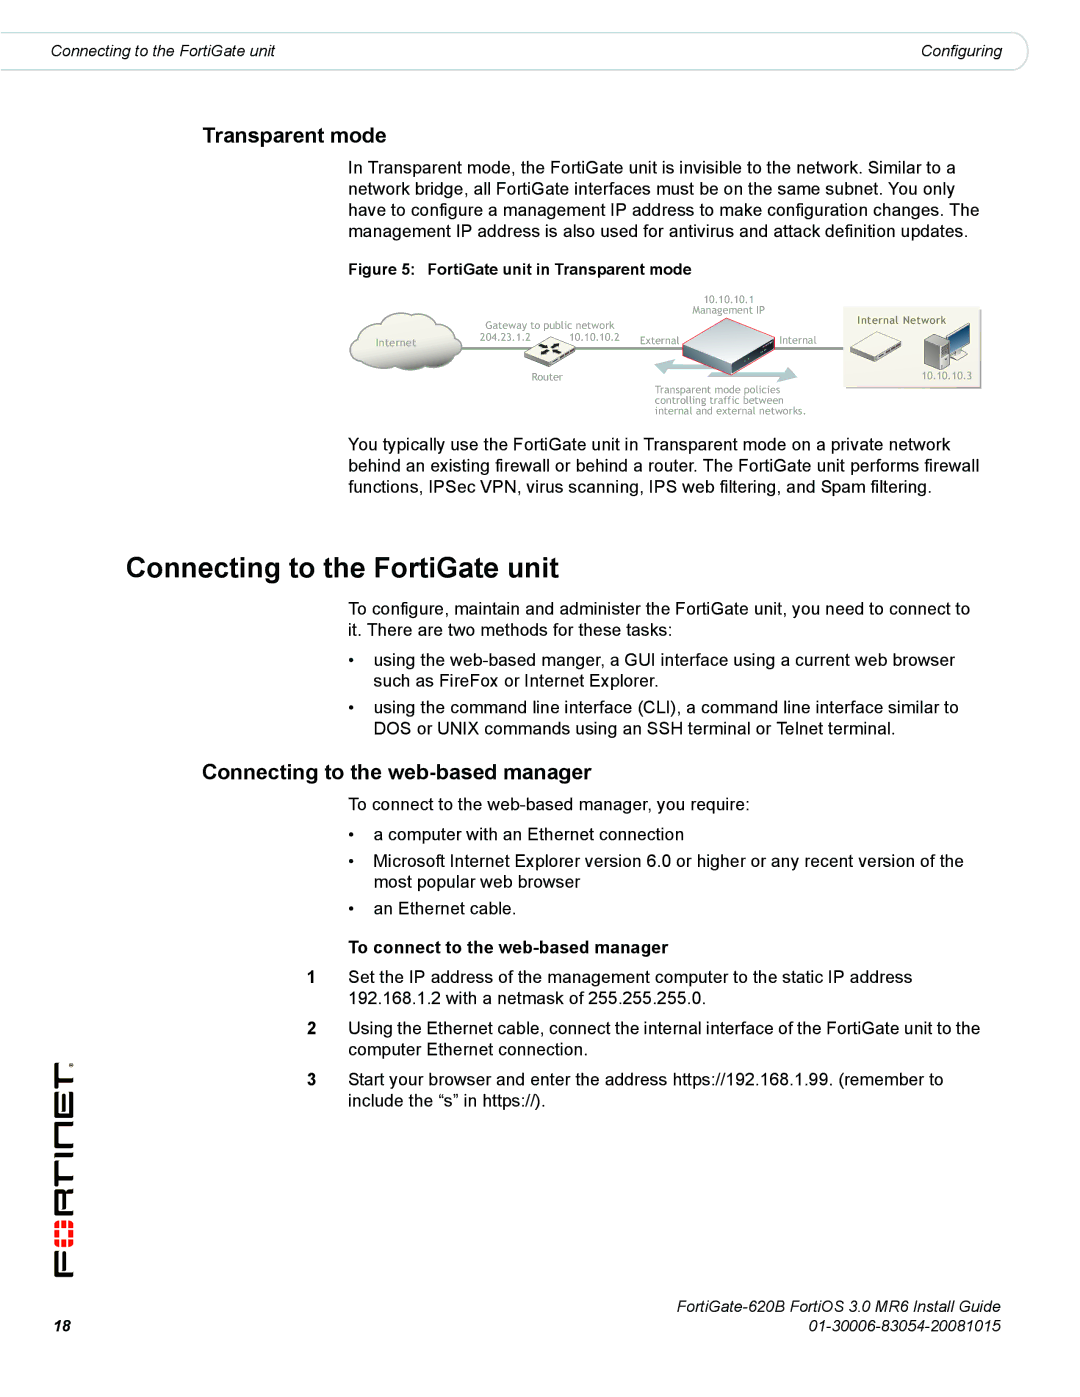 Fortinet 620B manual Connecting to the FortiGate unit, Transparent mode, Connecting to the web-based manager 